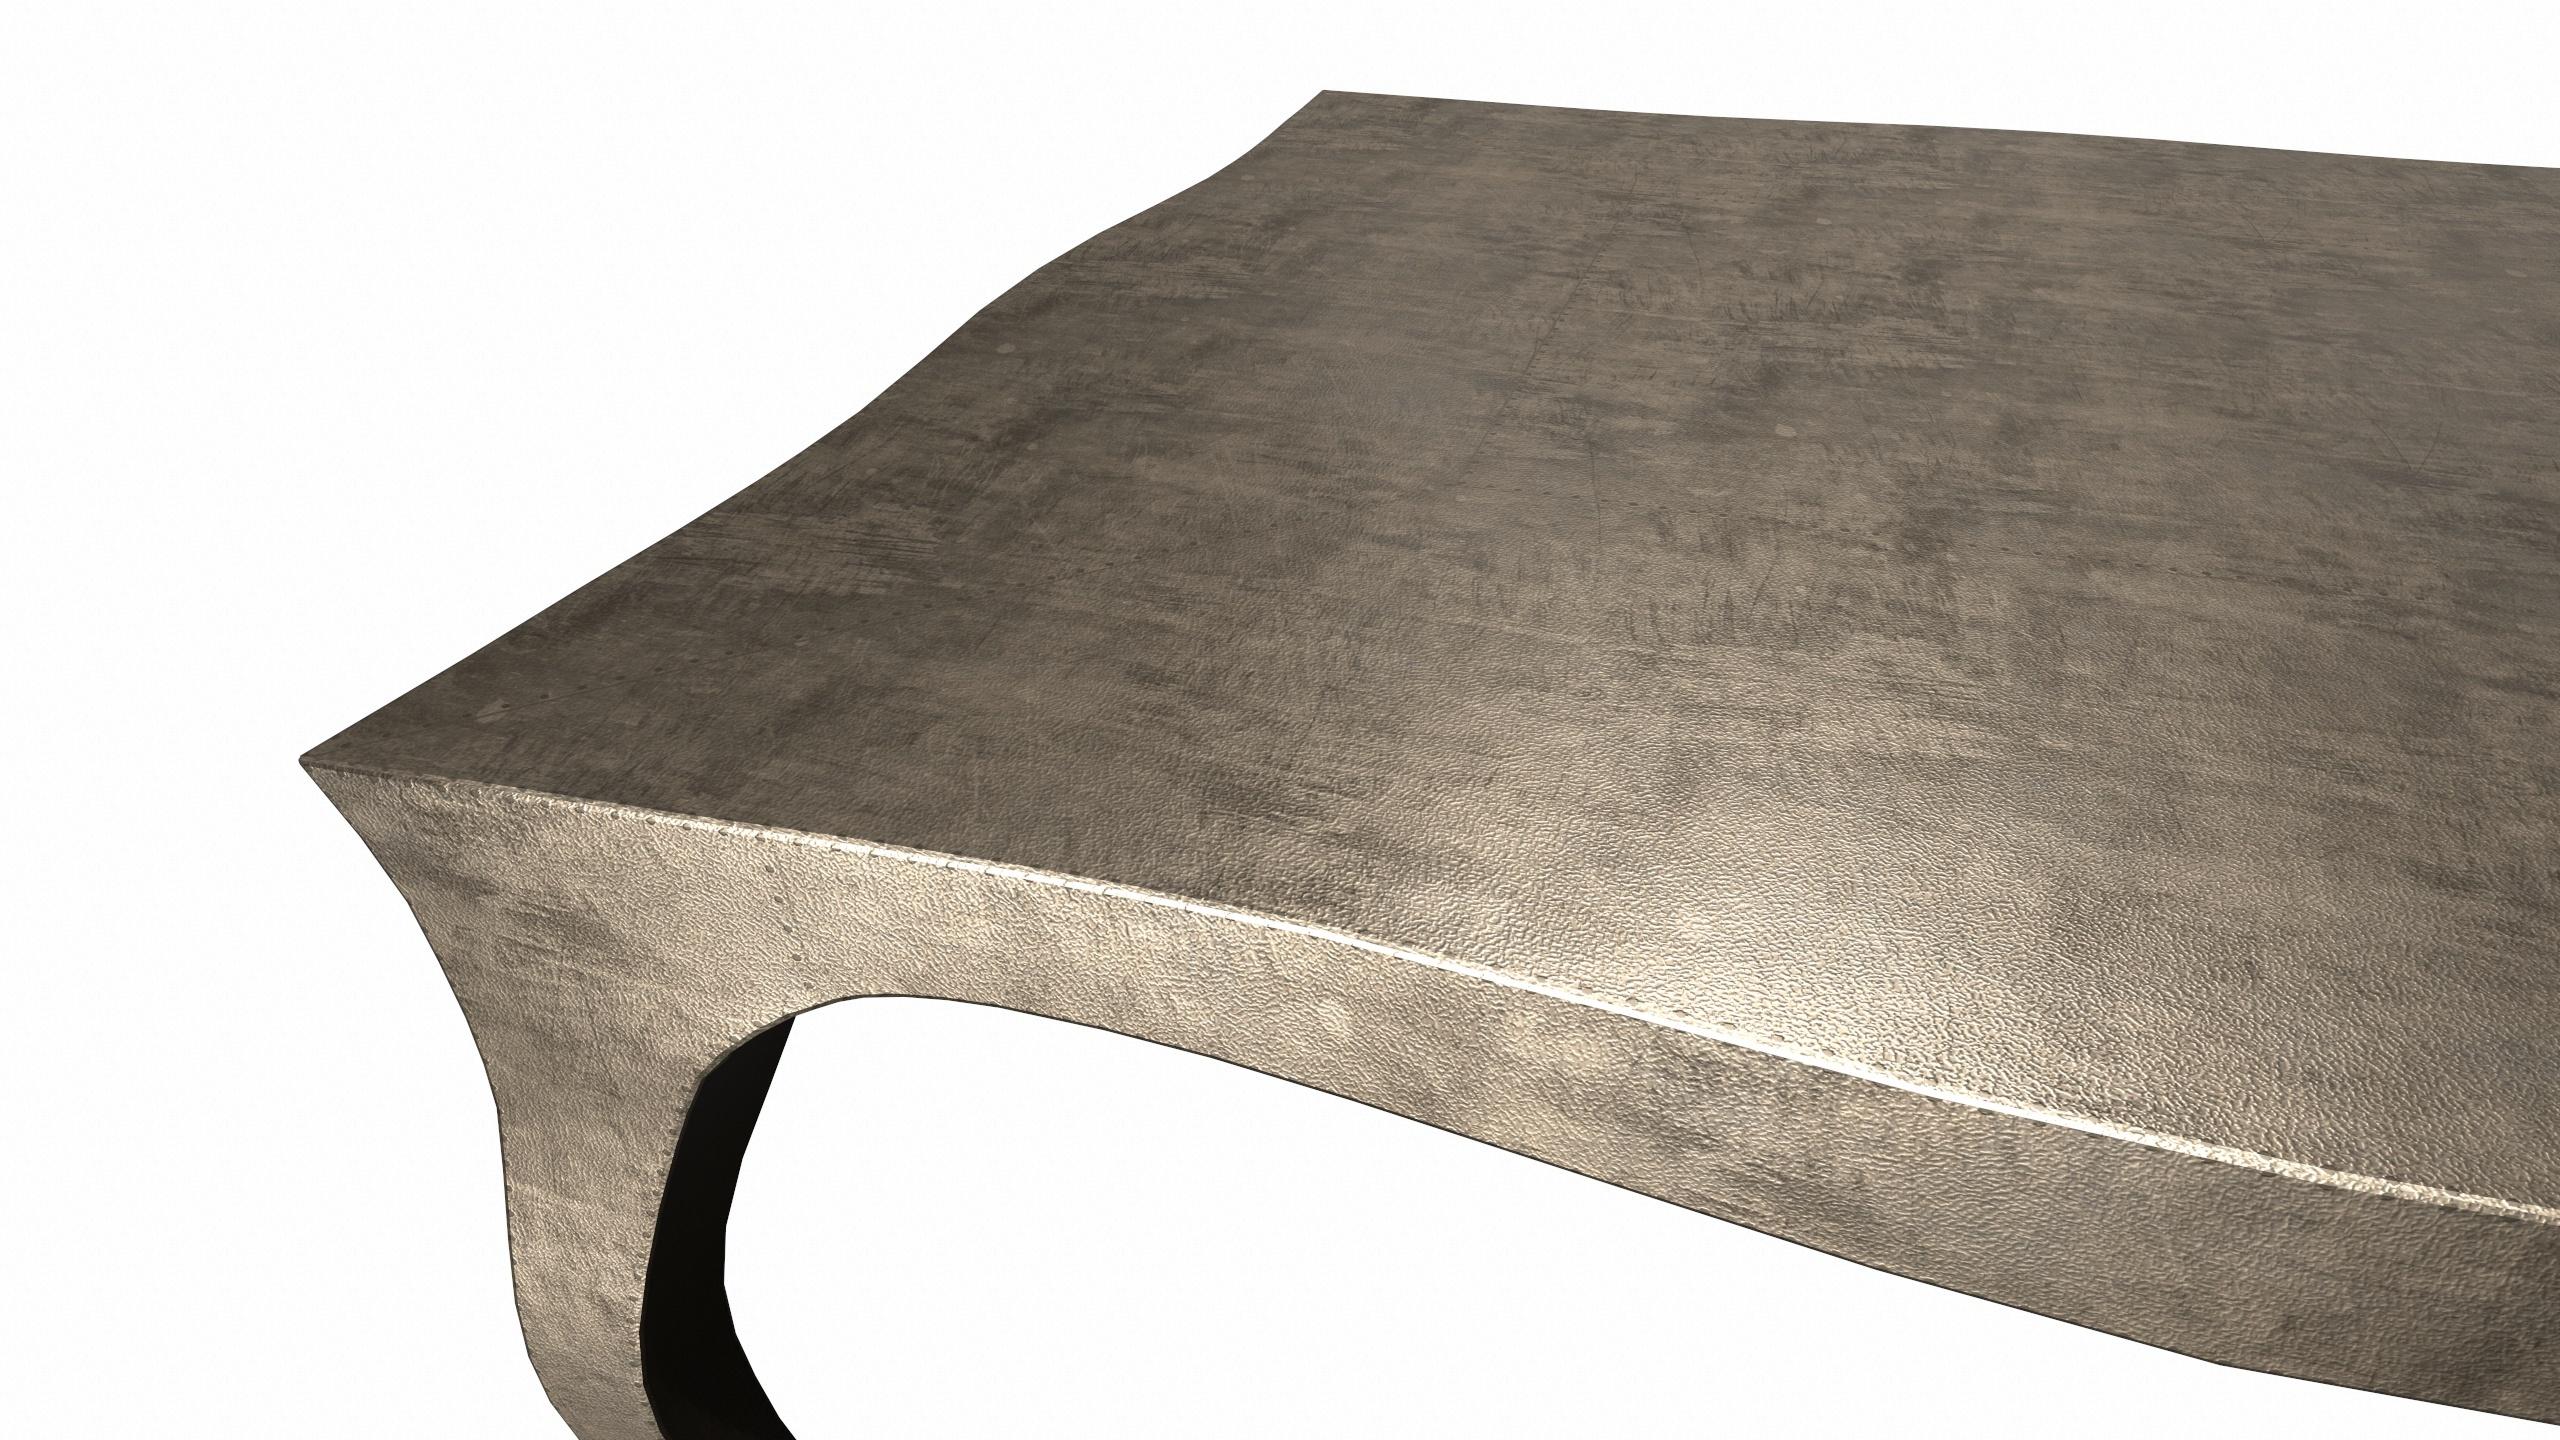 Other Louise Art Deco Center Tables Fine Hammered Antique Bronze by Paul Mathieu For Sale